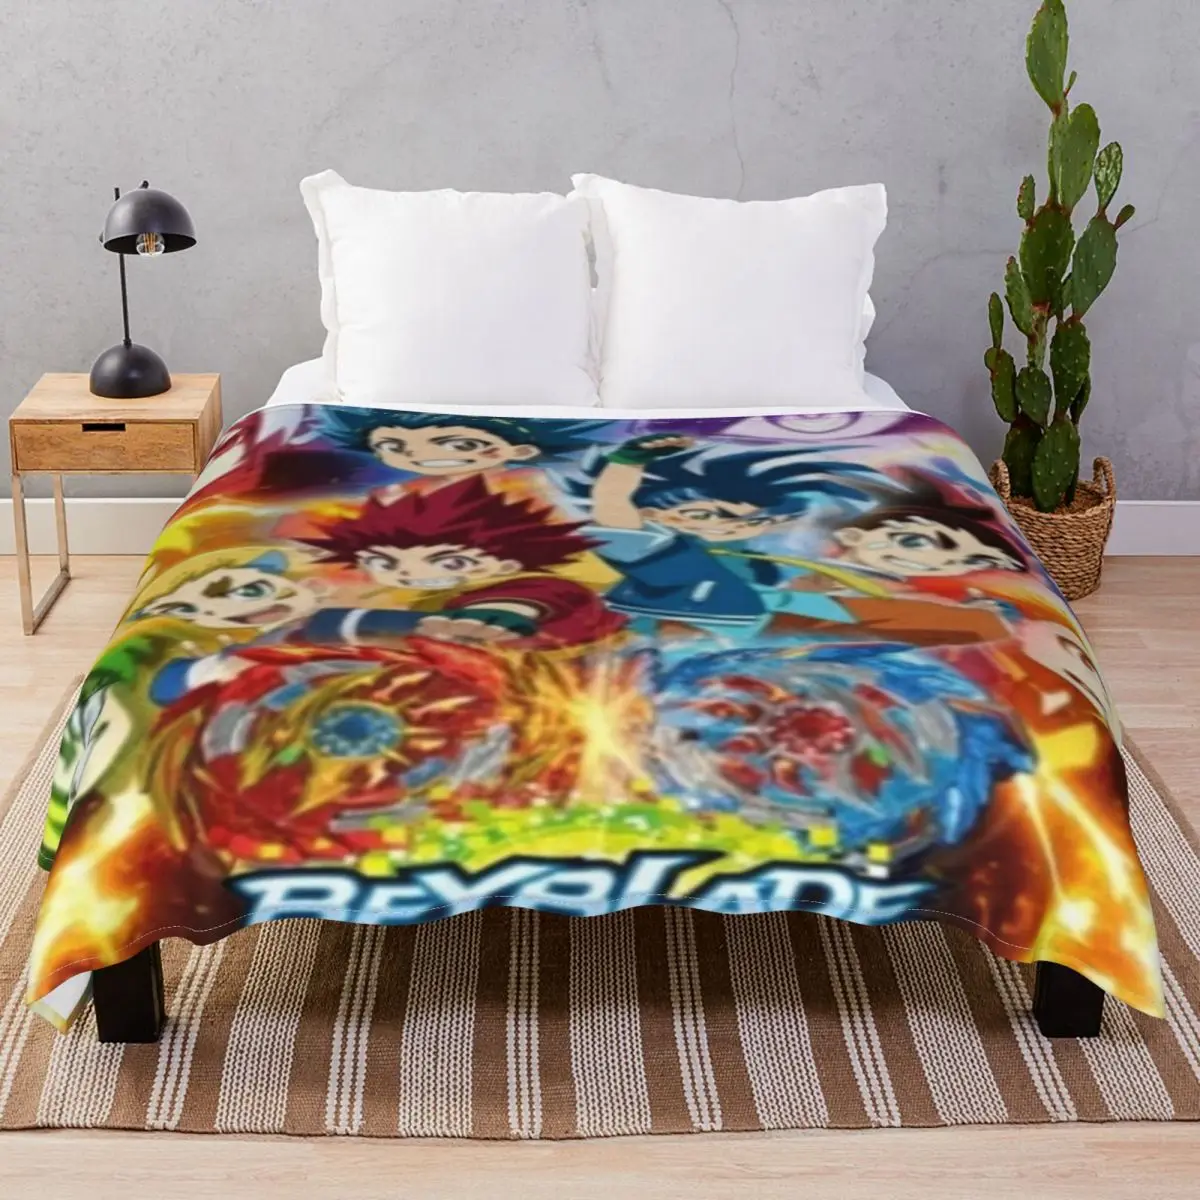 BEYBLADE Blankets Coral Fleece Spring Autumn Portable Throw Blanket for Bed Home Couch Camp Cinema